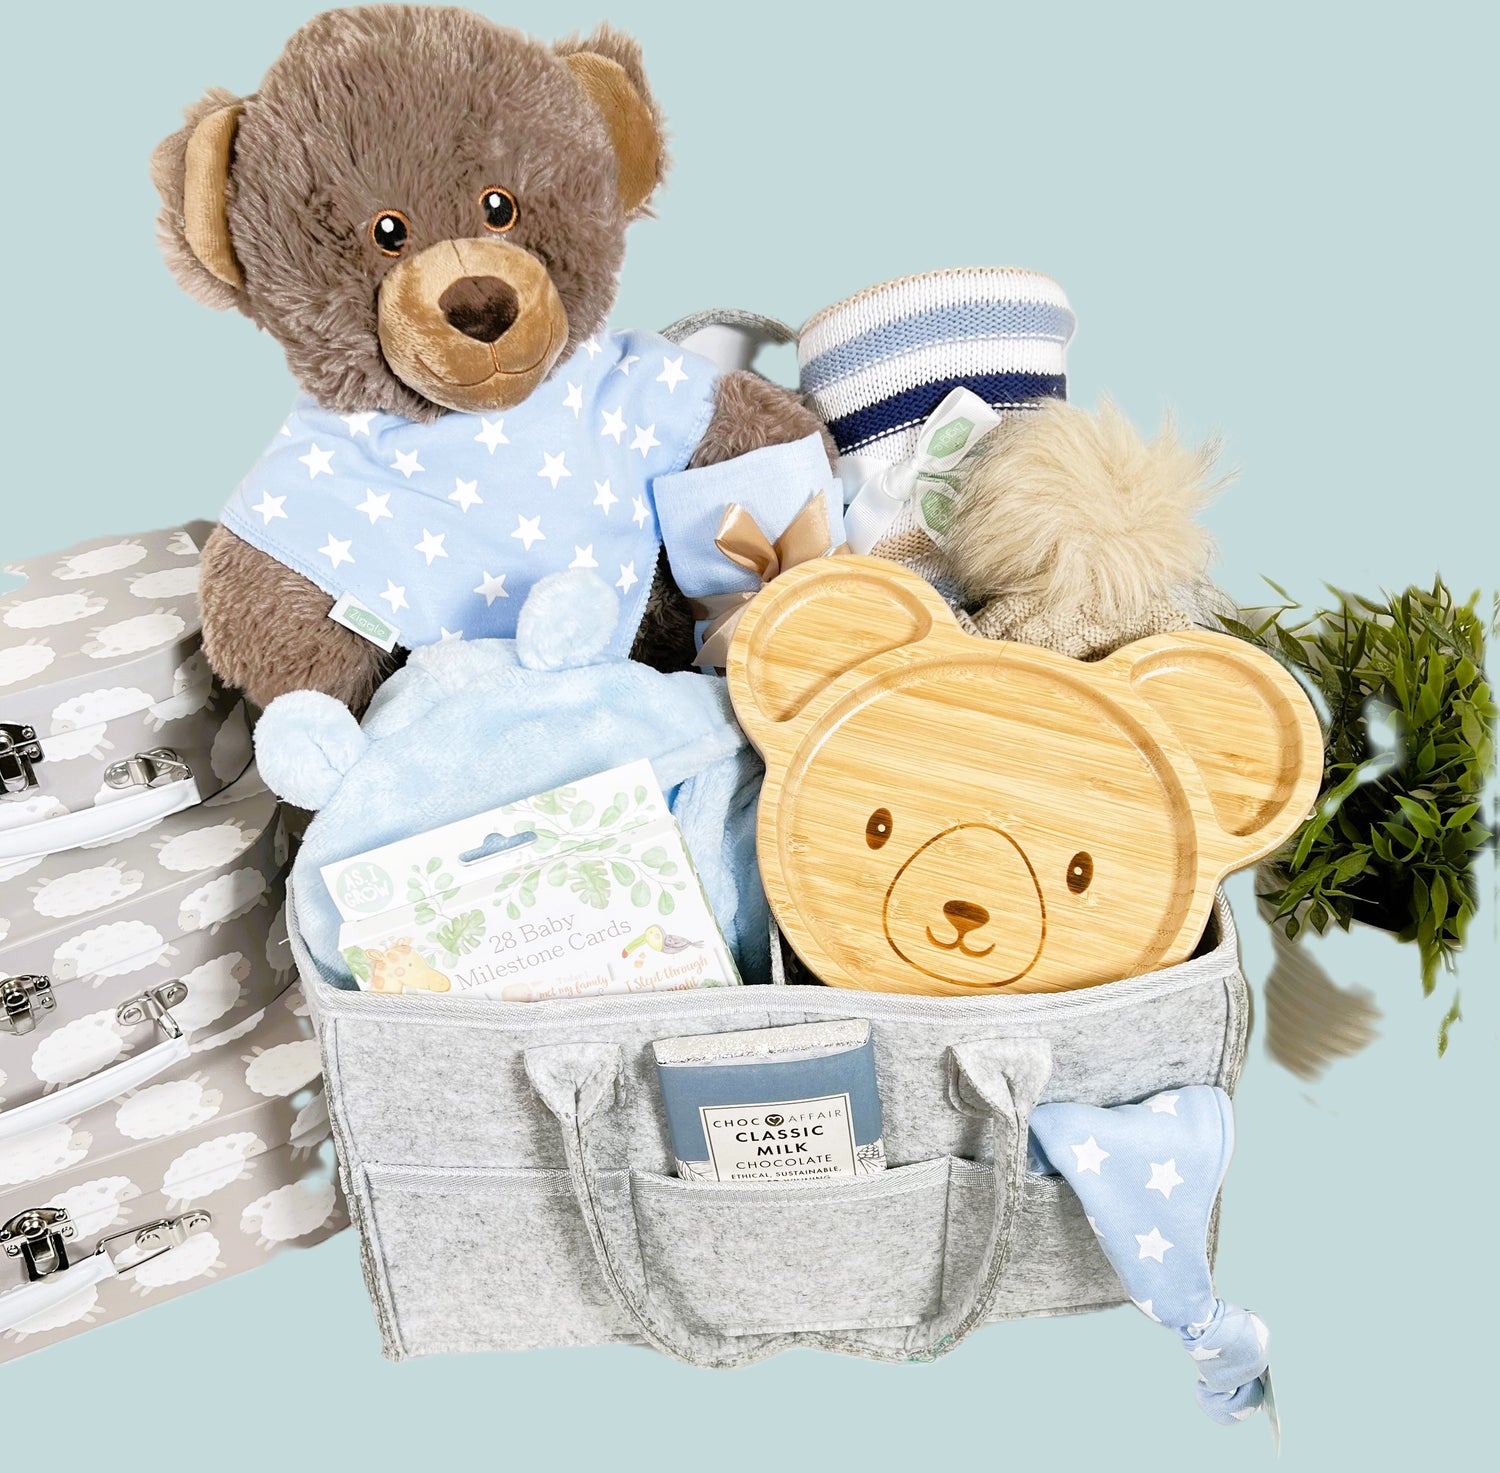 Nappy Caddy new baby boy gift in a fgrey felt nappy caddy with thre compartments and six pockets containing a large brown bear soft toy made from recycled plastics, a bamboo baby plate with bear face, a blue hooded baby dressing gown, a pack of baby milestone cards, baby pompom hat, a blue baby muslin square, baby toiletries and a Choc Affair bar of chocolate.